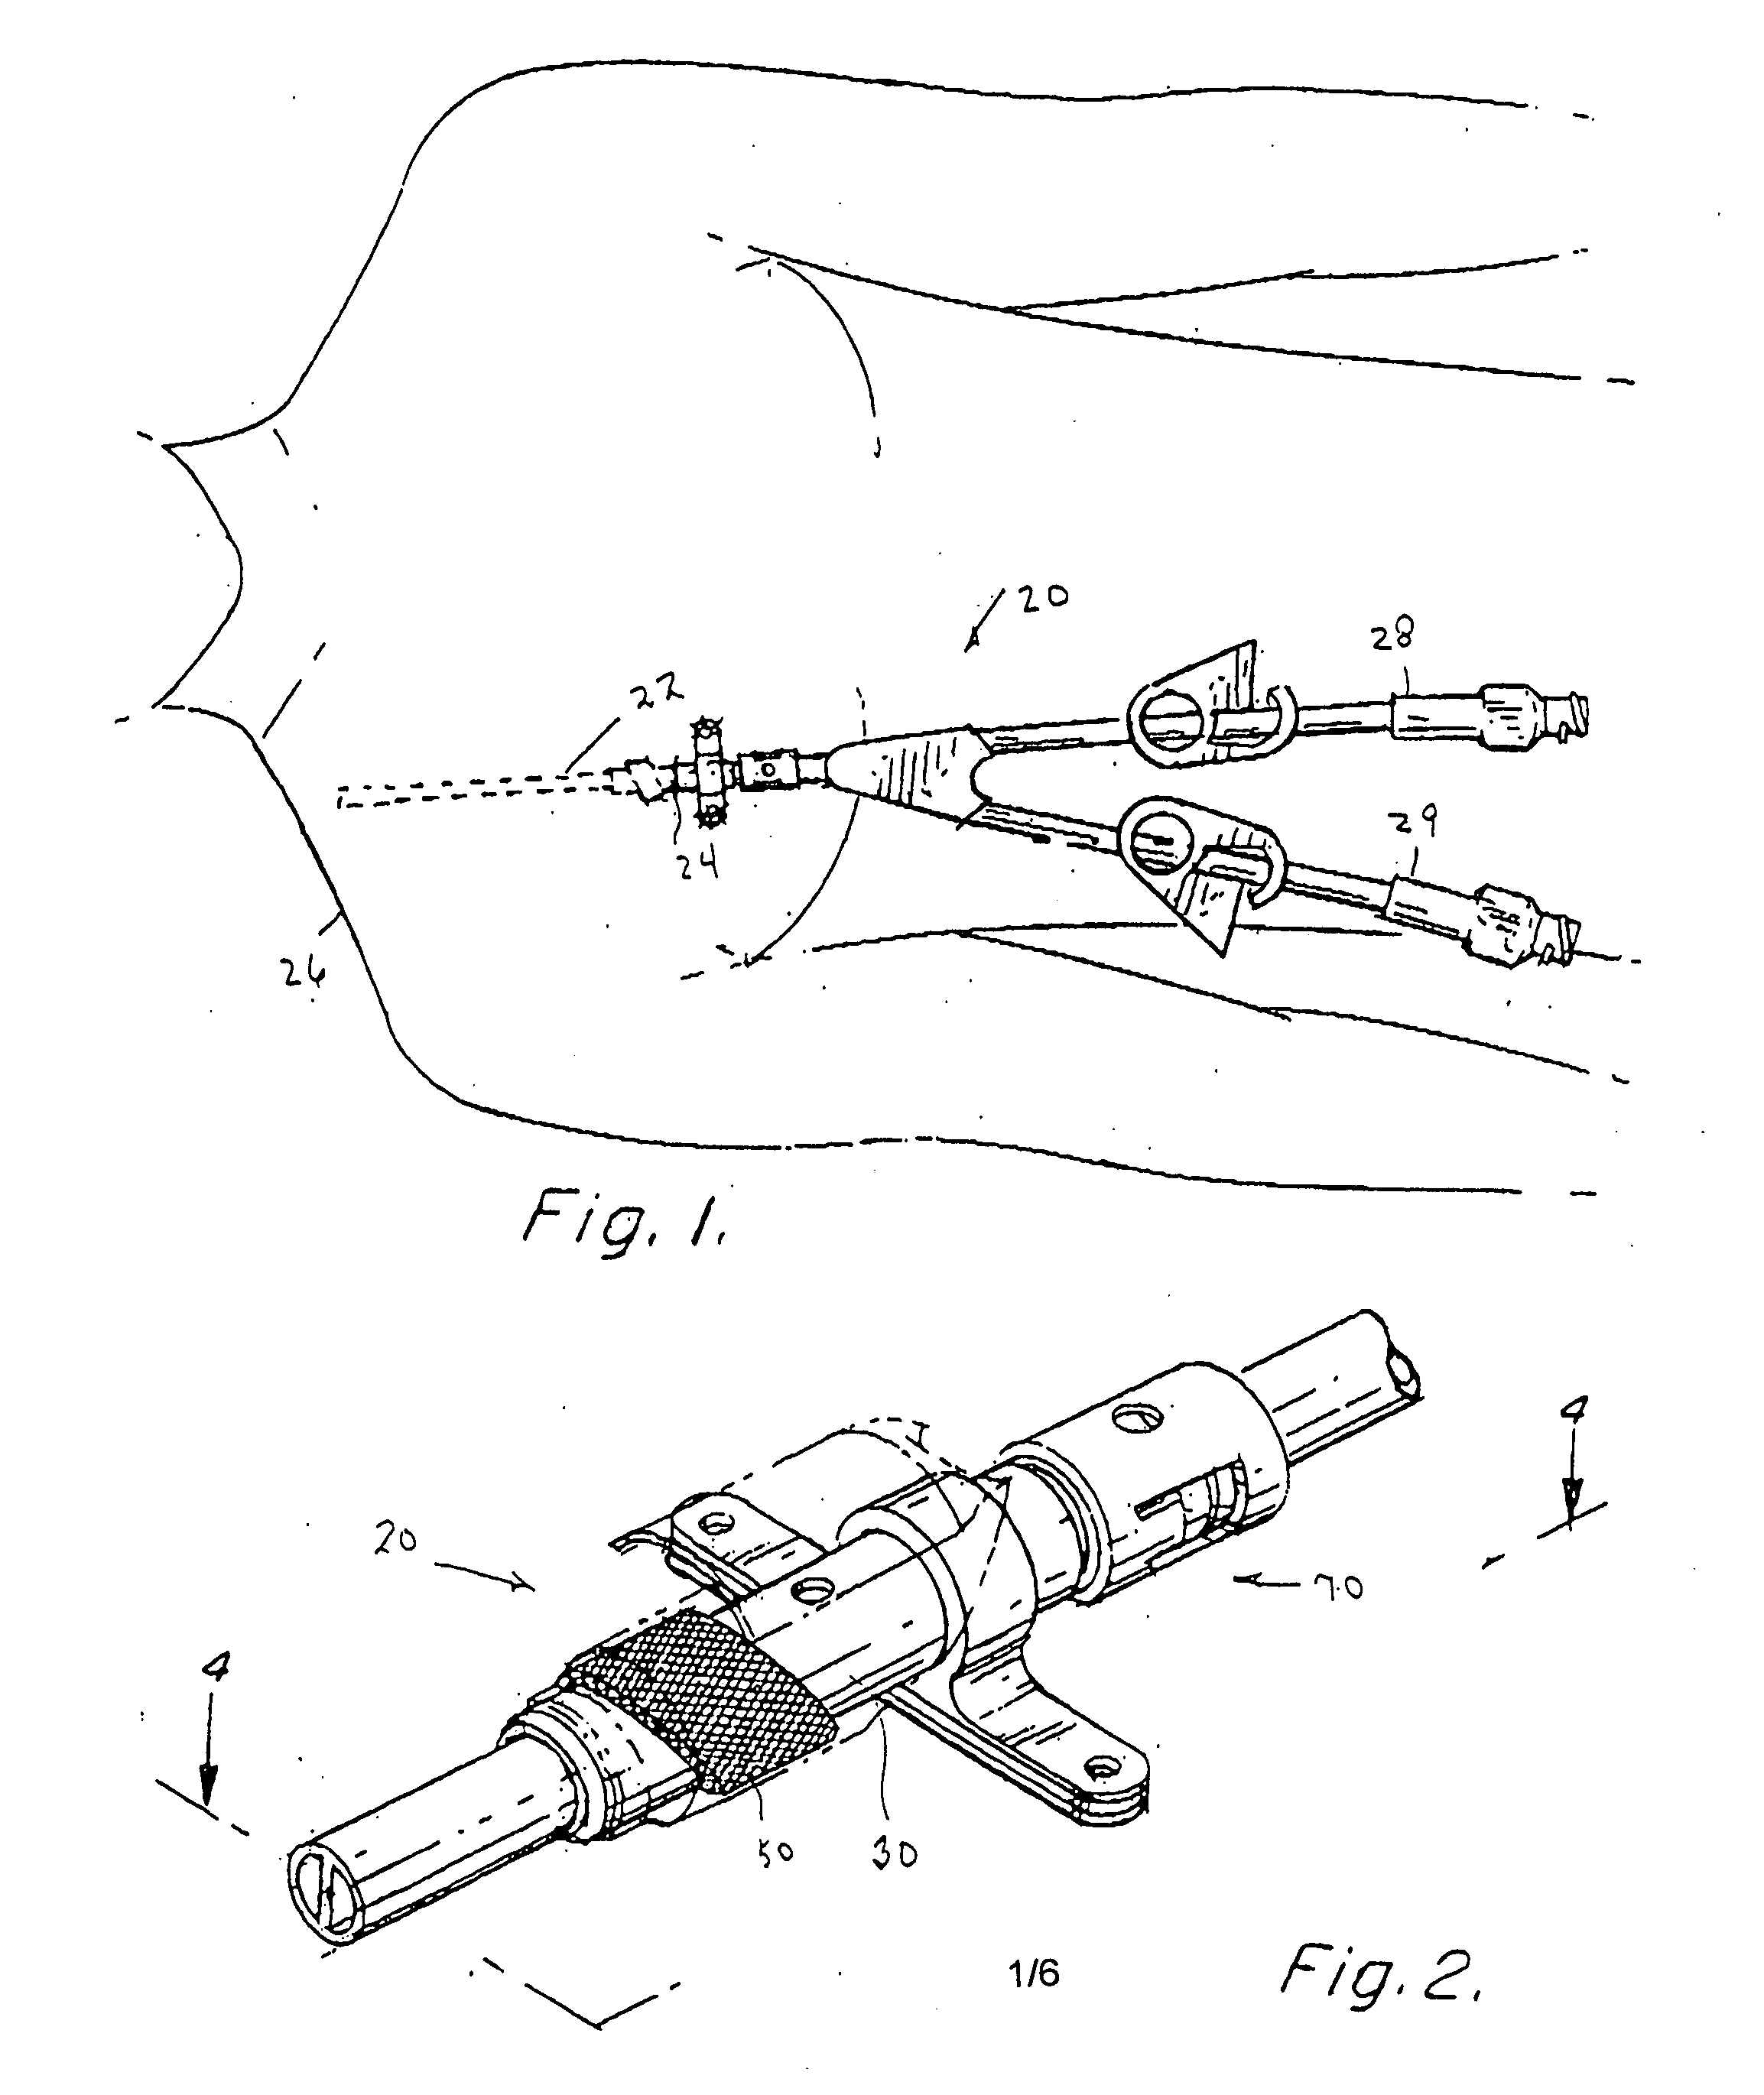 Apparatus and method for facilitating the replacement of an implanted catheter